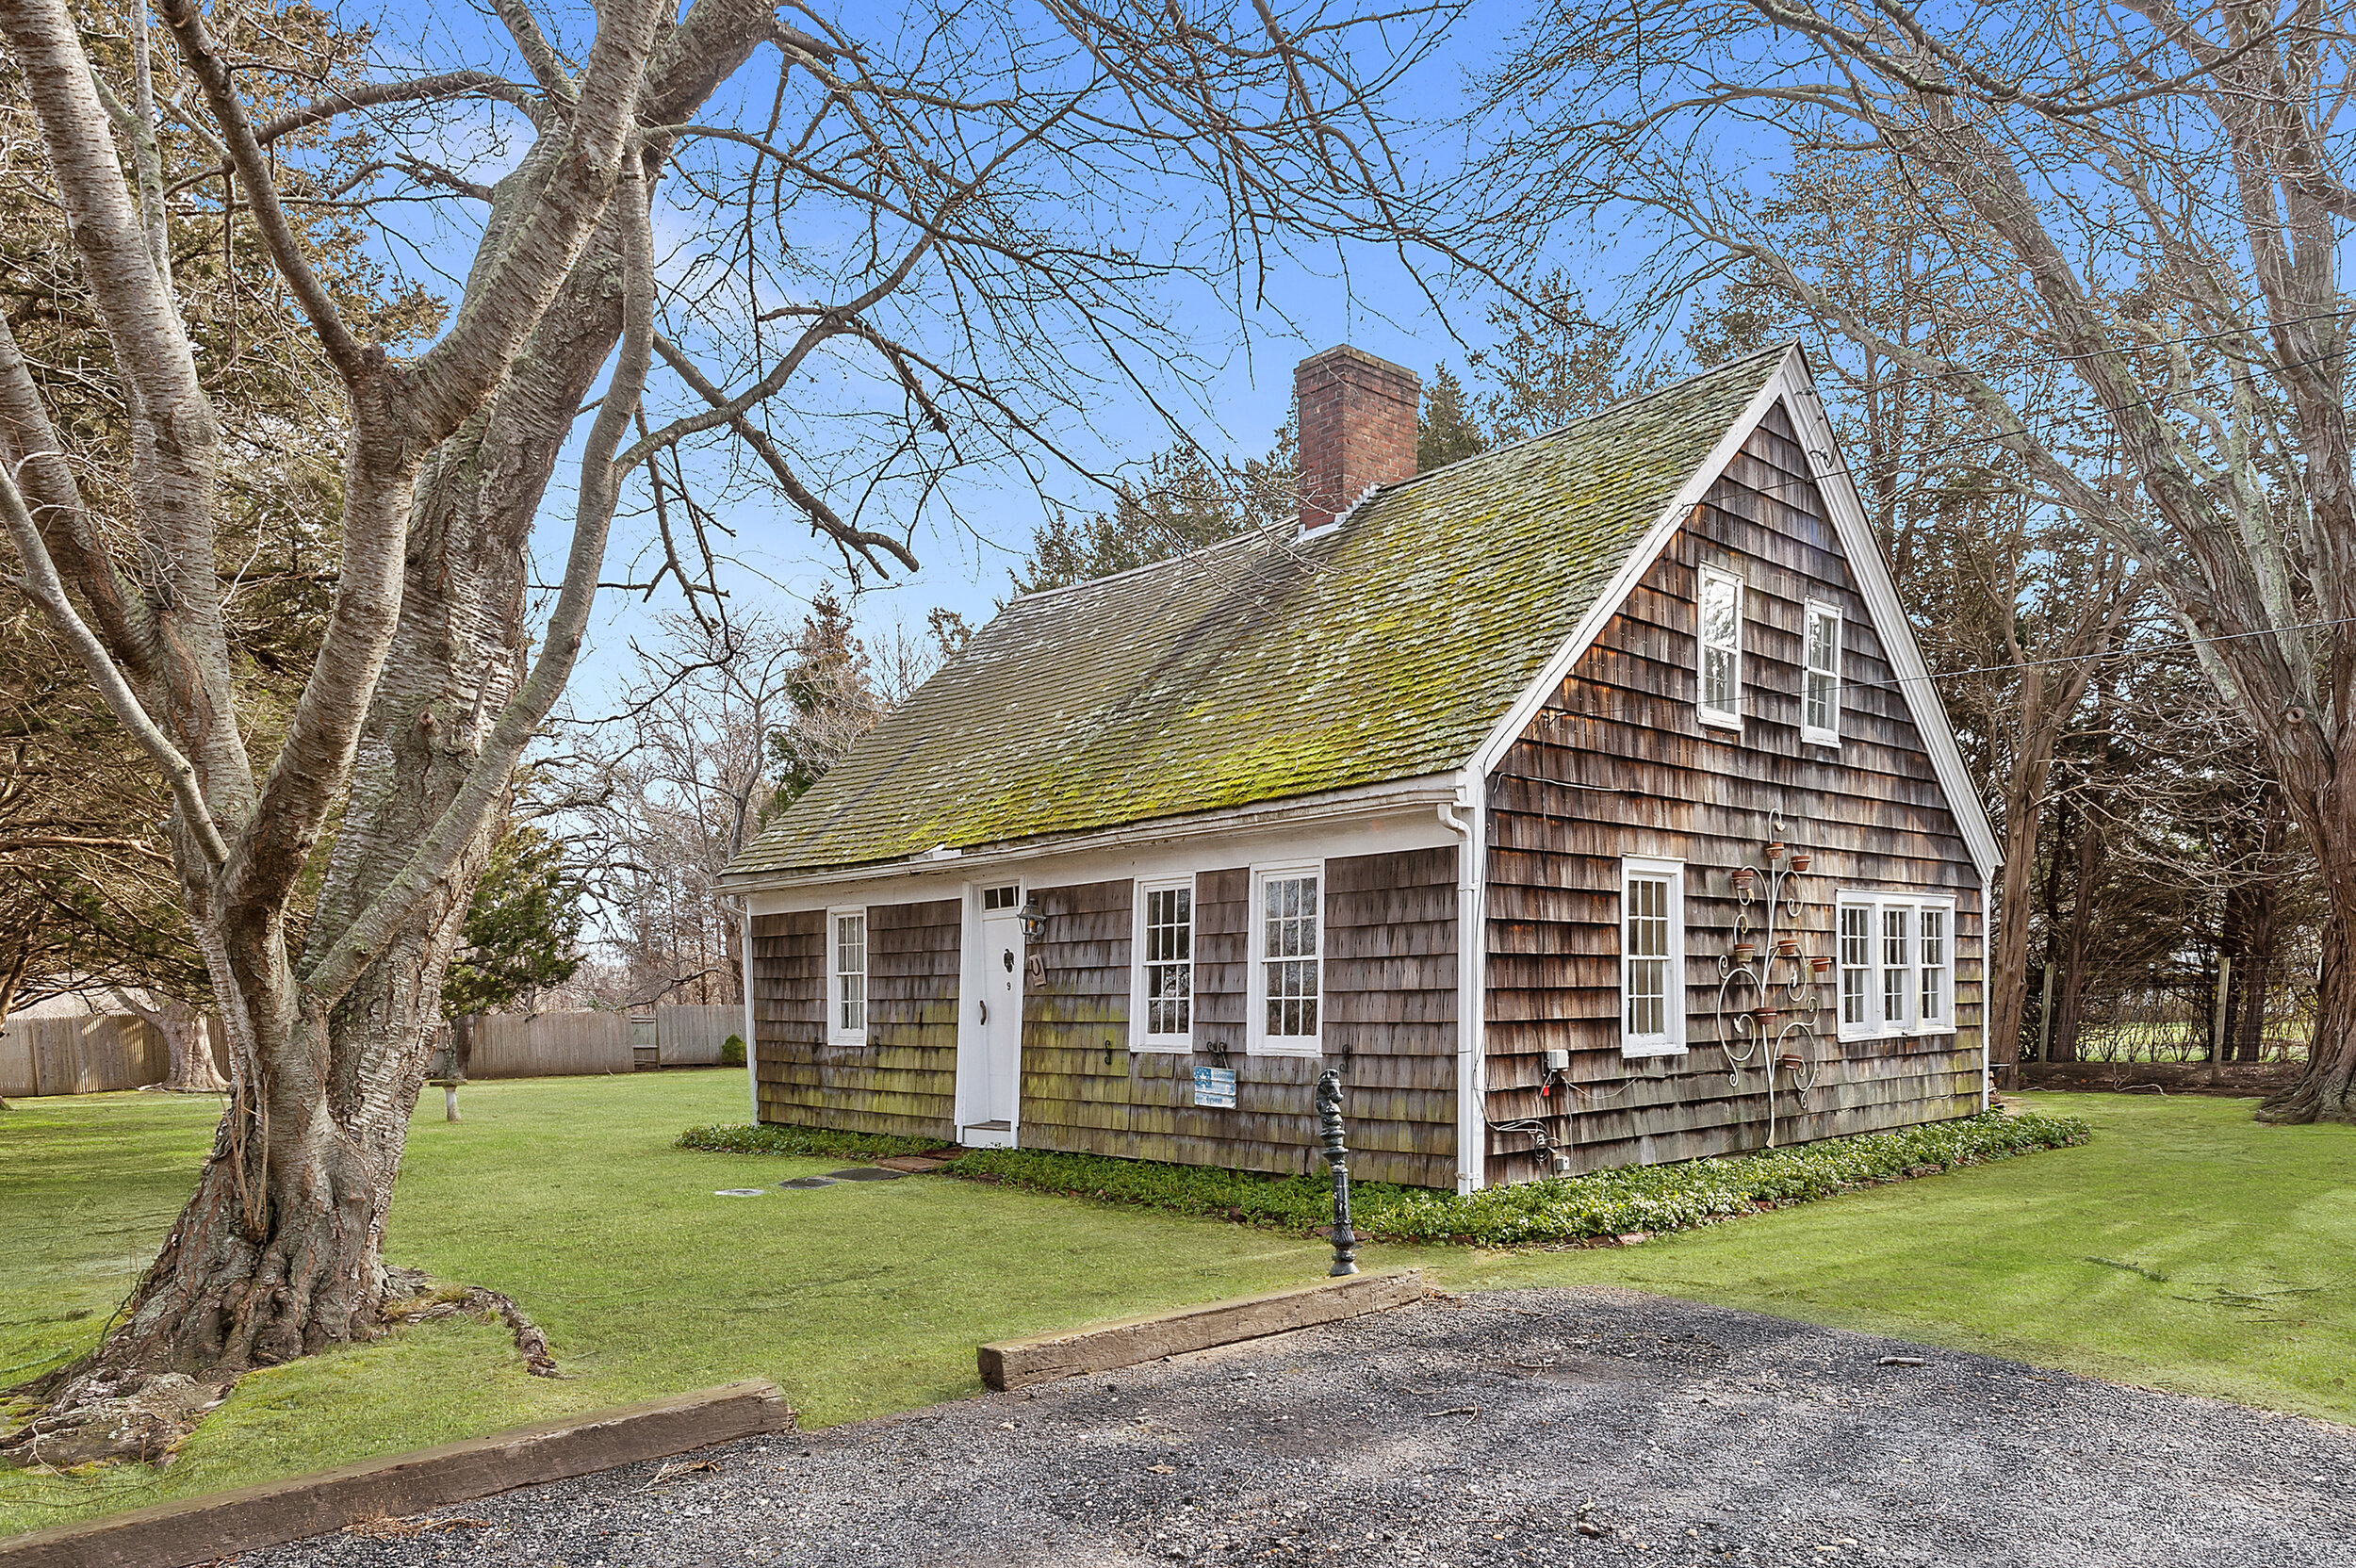  Loads of charm, just down the street from the ocean and Two Mile Hollow Beach, and one of only a handful of properties in East Hampton affording the rare opportunity to build two houses on one lot, this circa-1745 gem offers some dazzling possibilit